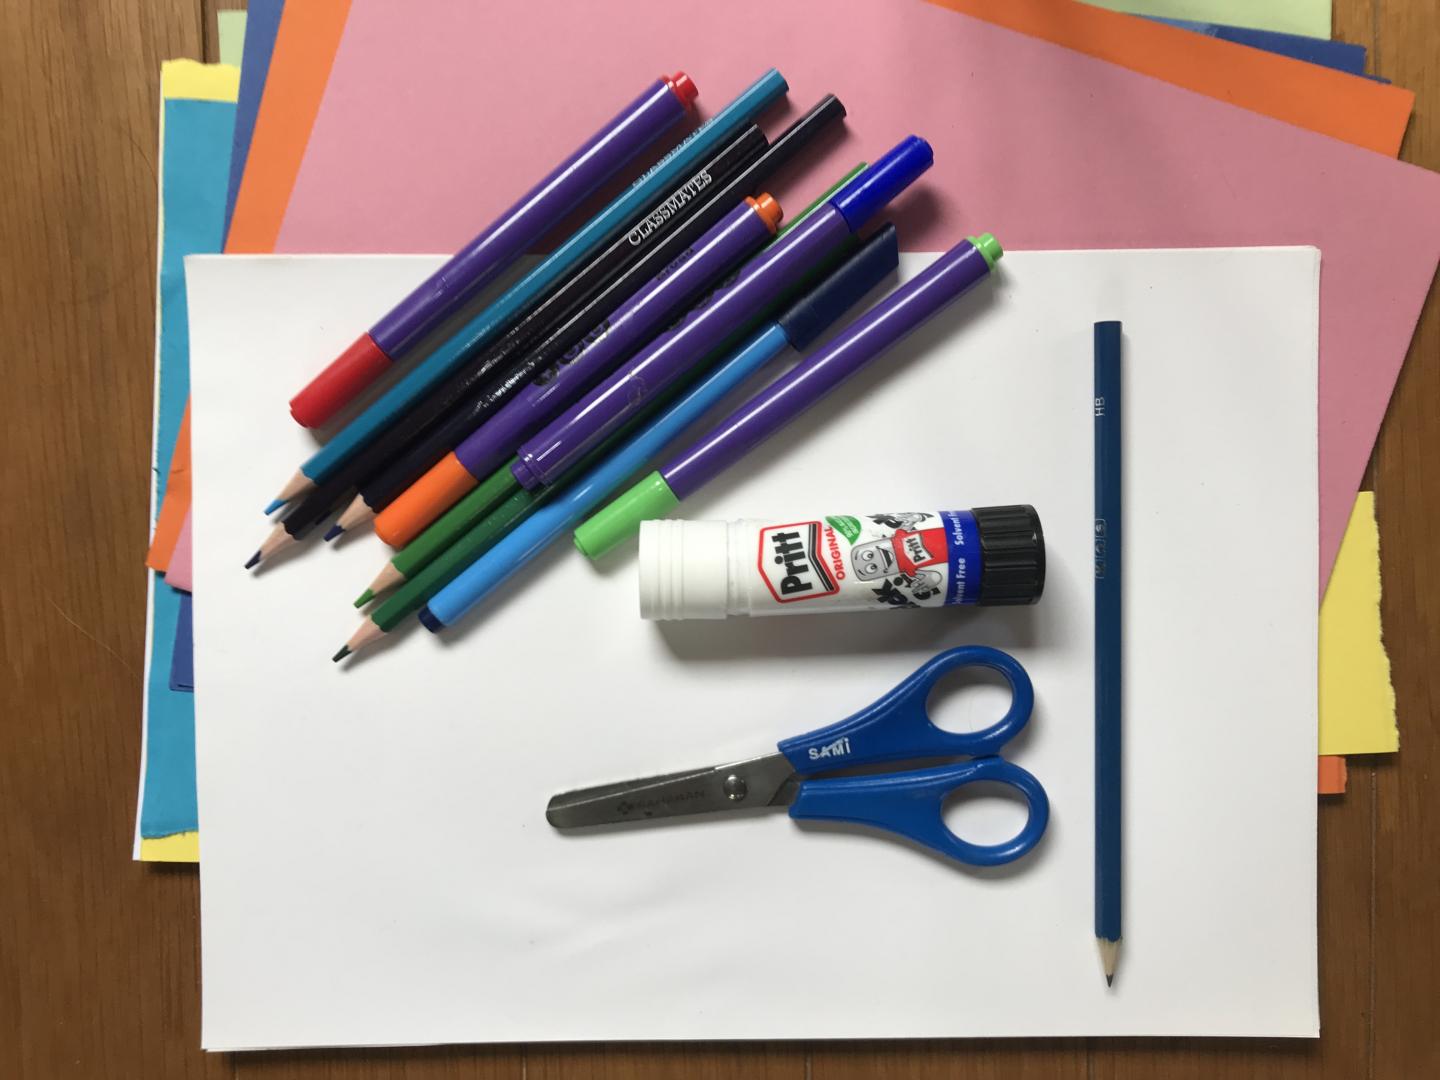 (Source of scissors, felt pens glue and colorful papers picture)